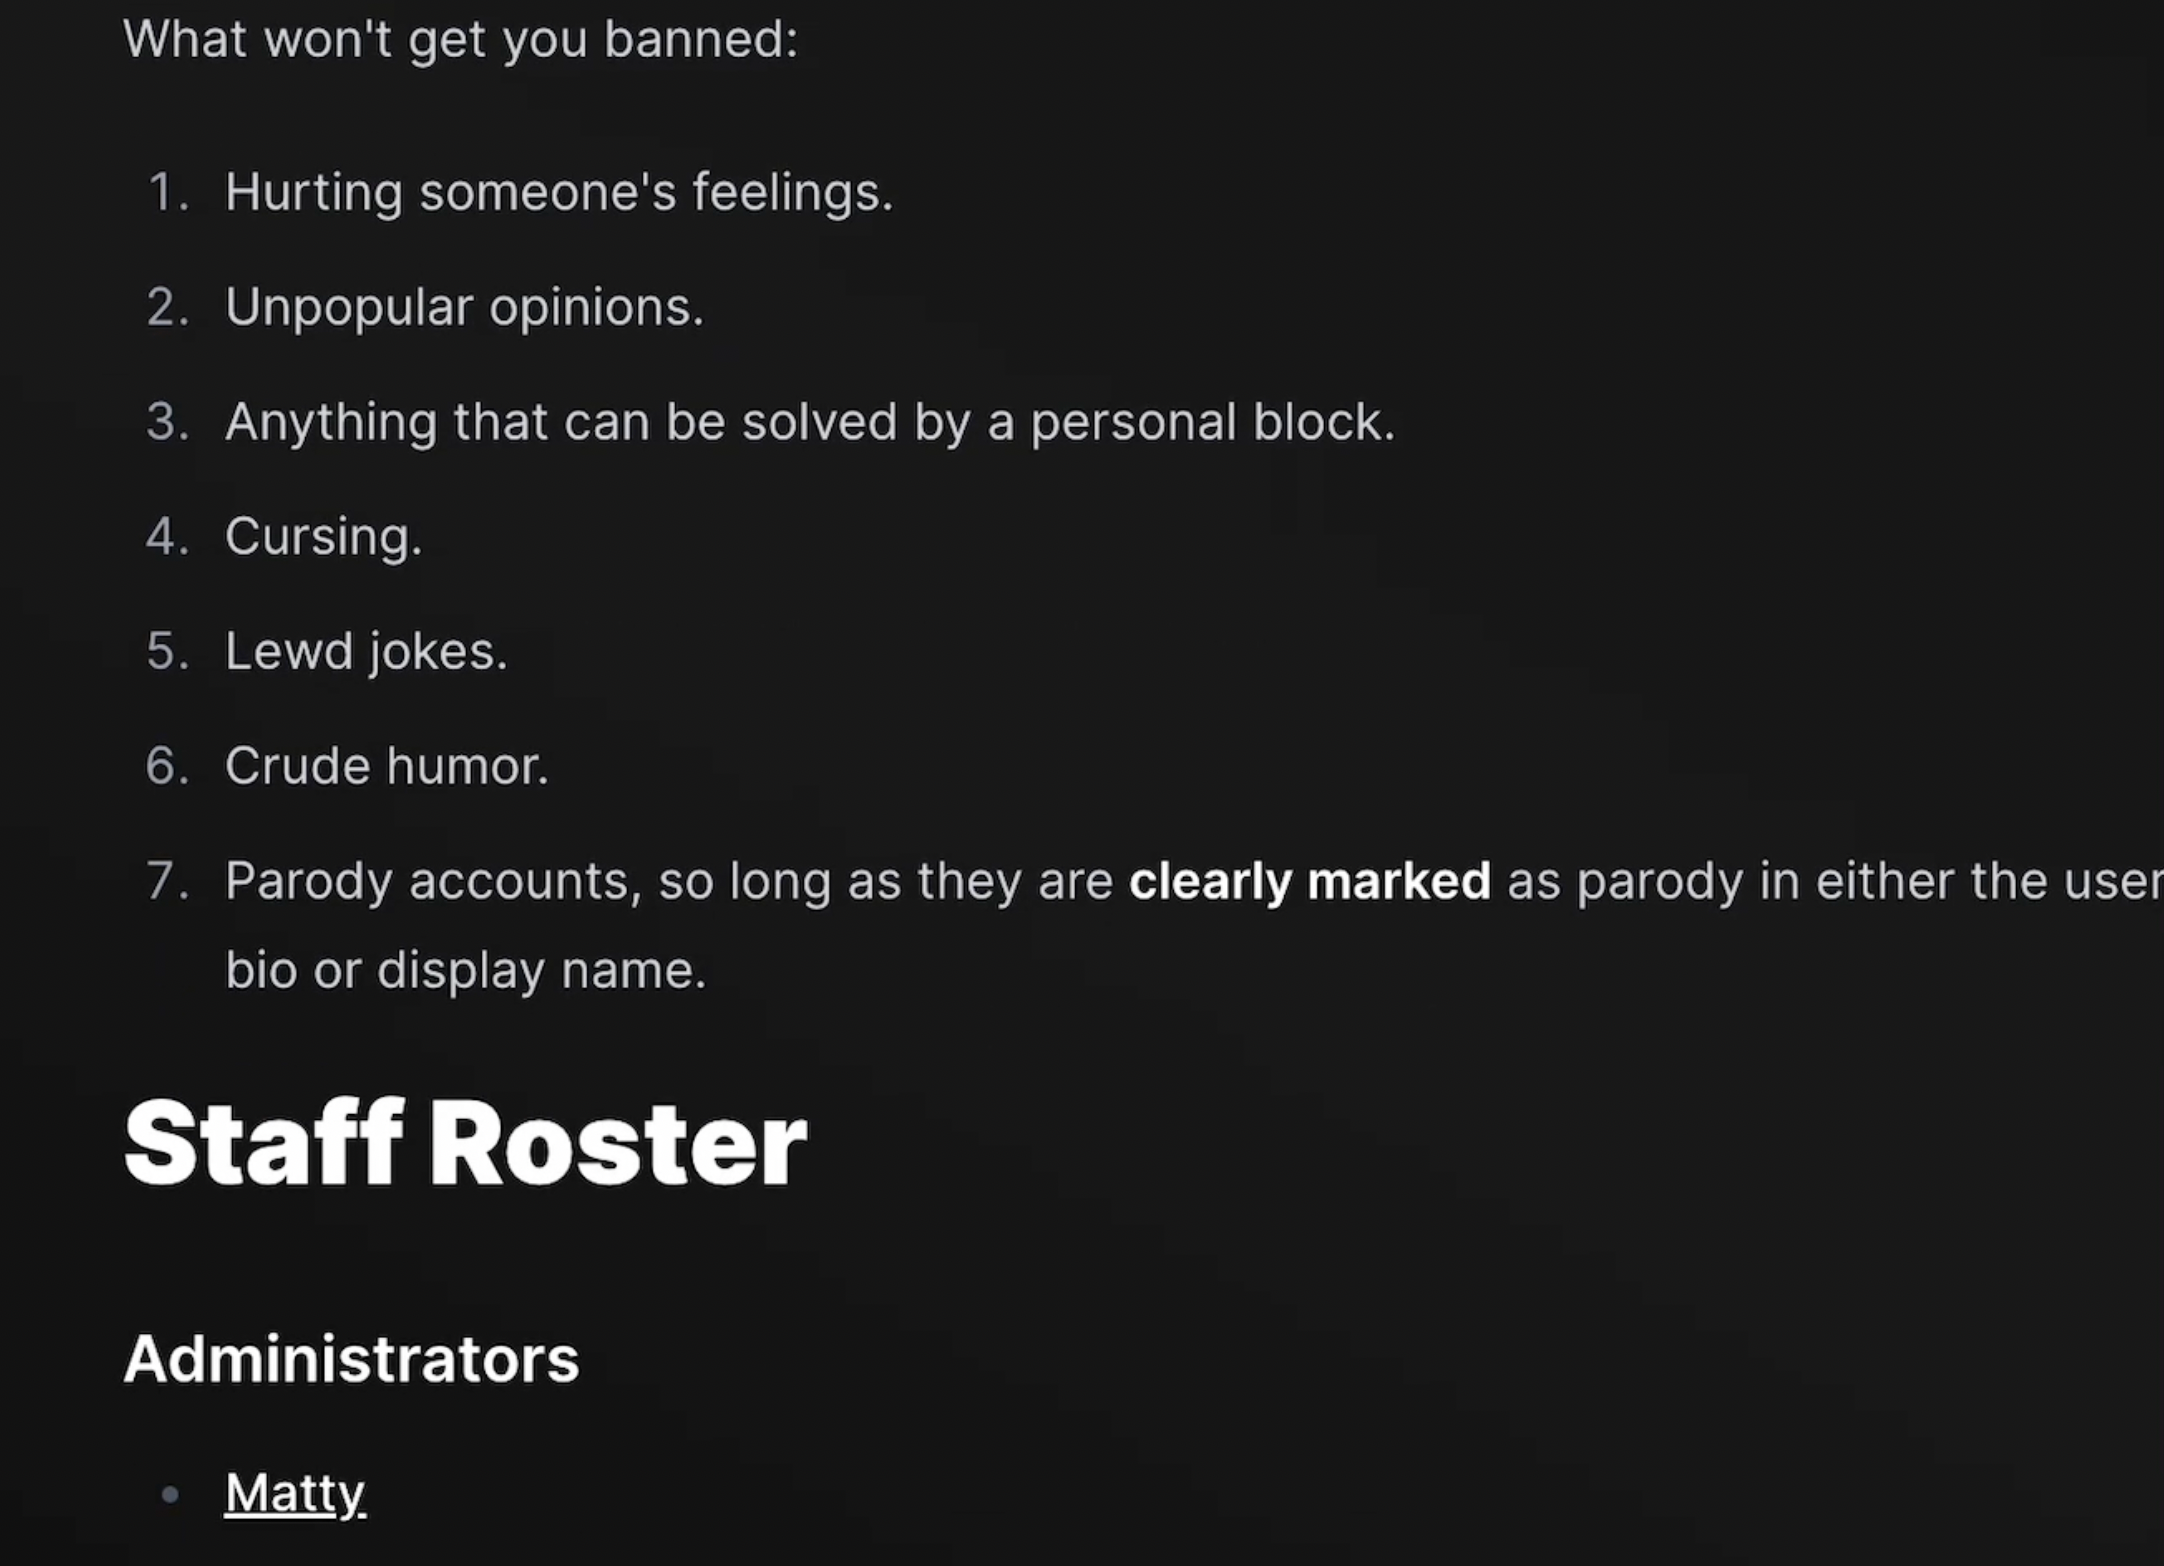 Site rules for Poast instance of NiceCrew cont'd. "What won't get you banned" list. Includes "Hurting someone's feelings," "unpopular opinions," "lewd jokes," "cursing," and "crude humor." Also shows "Staff Roster" and "Administrators" listing "Matty."